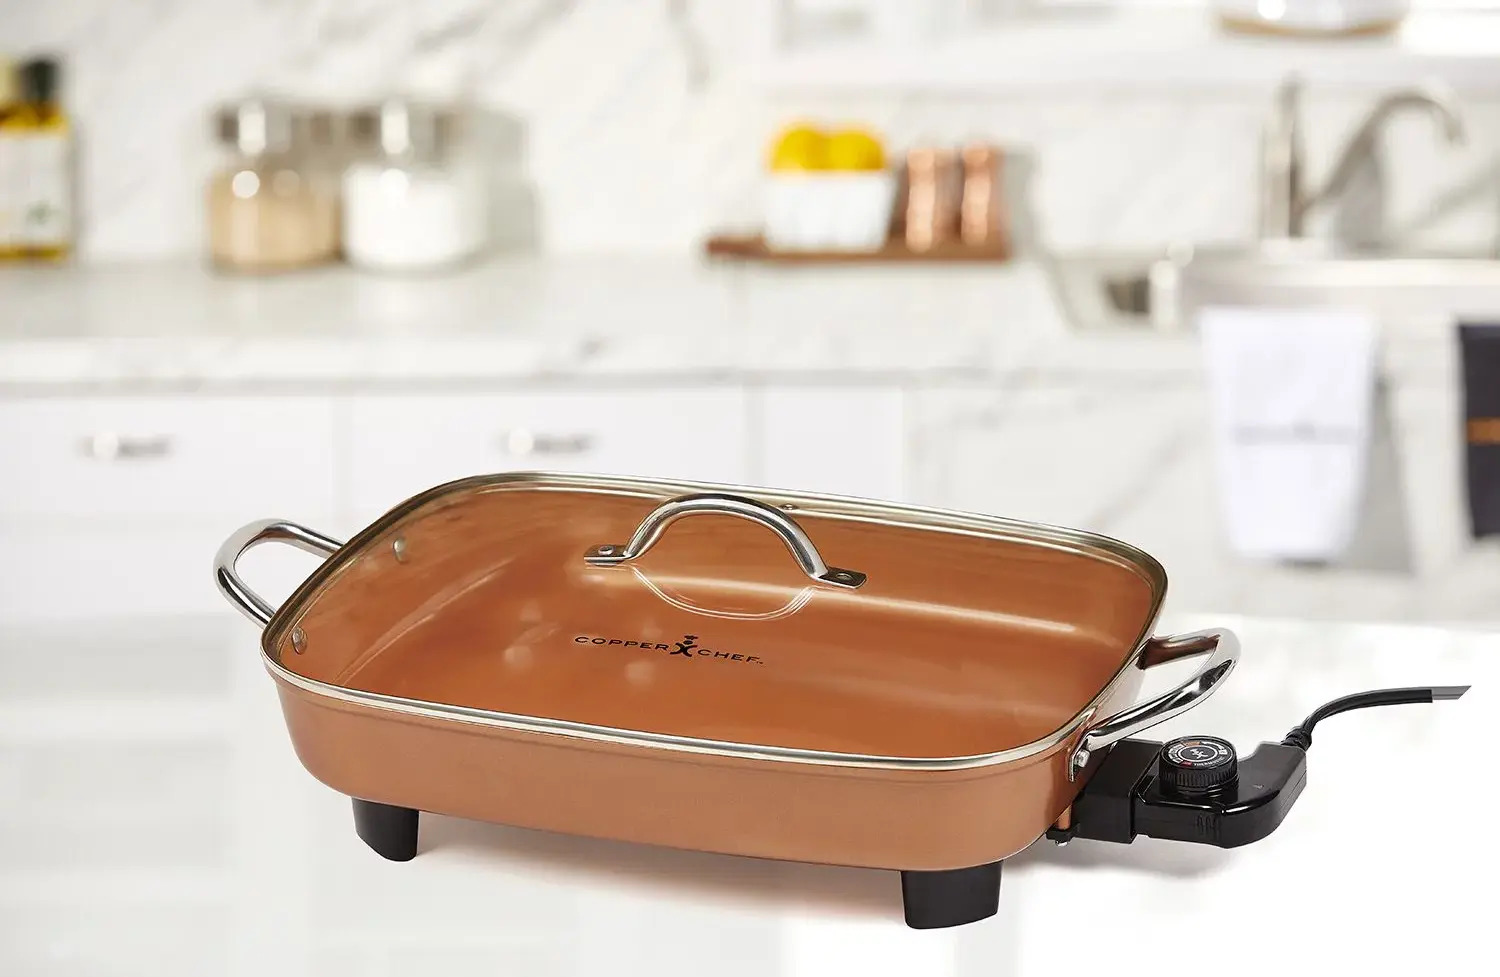 12 Amazing Copper Chef Electric Skillet For 2023 1690950495 